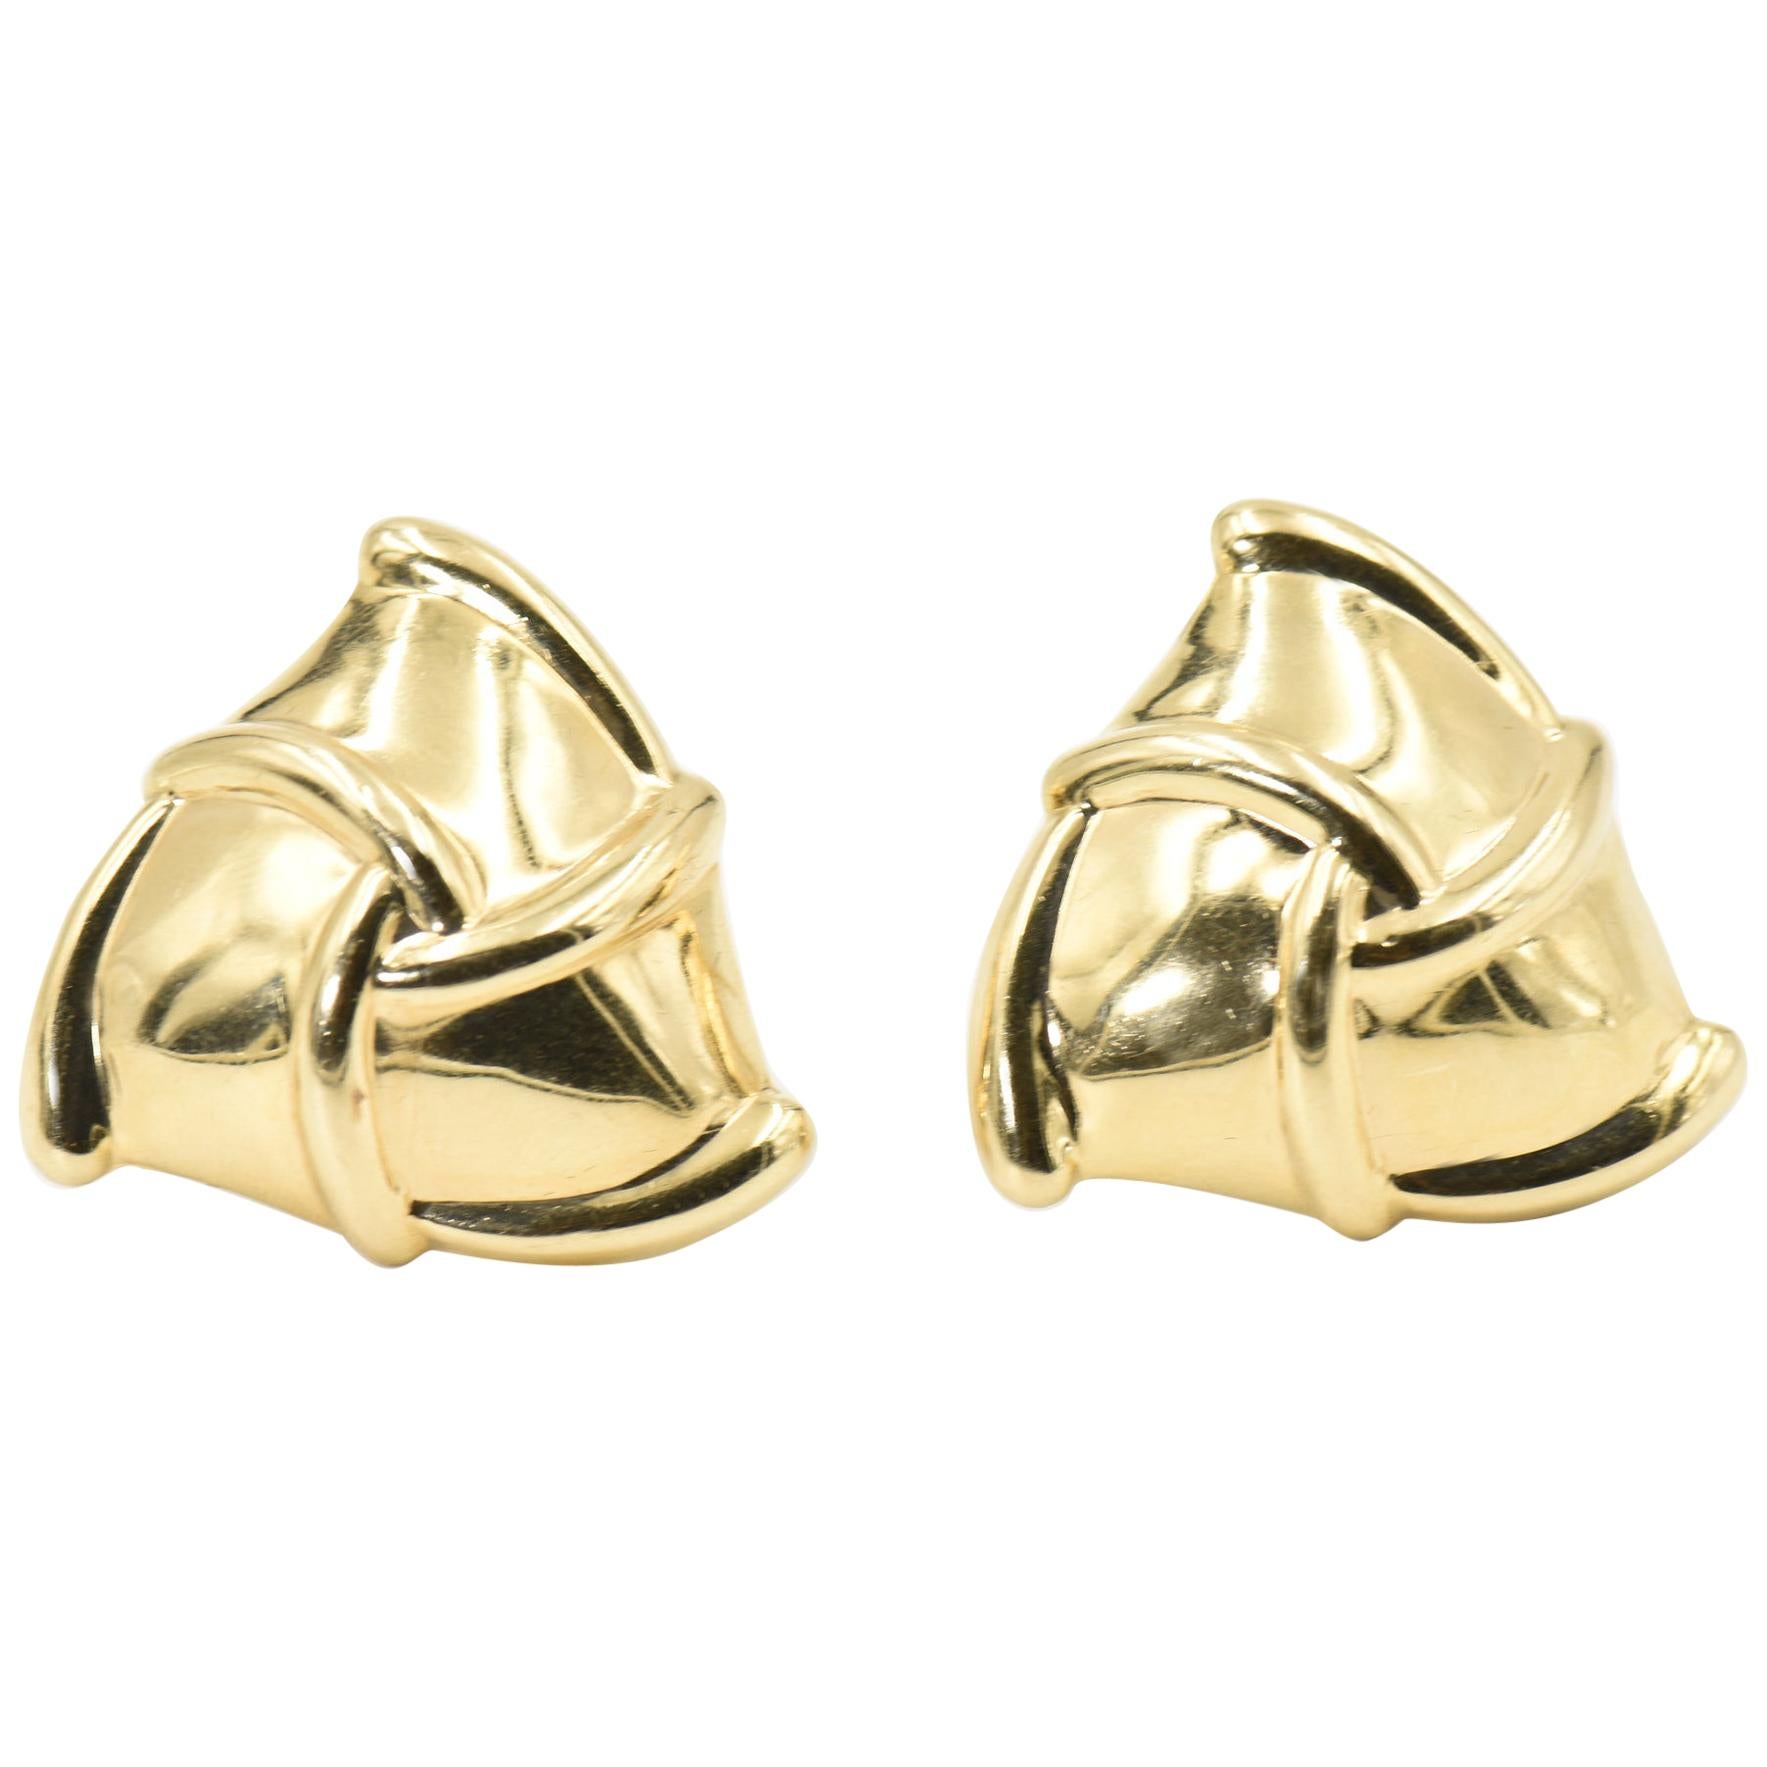 Domed Triangle 14 Karat Gold Earrings with Woven Ribbon Design